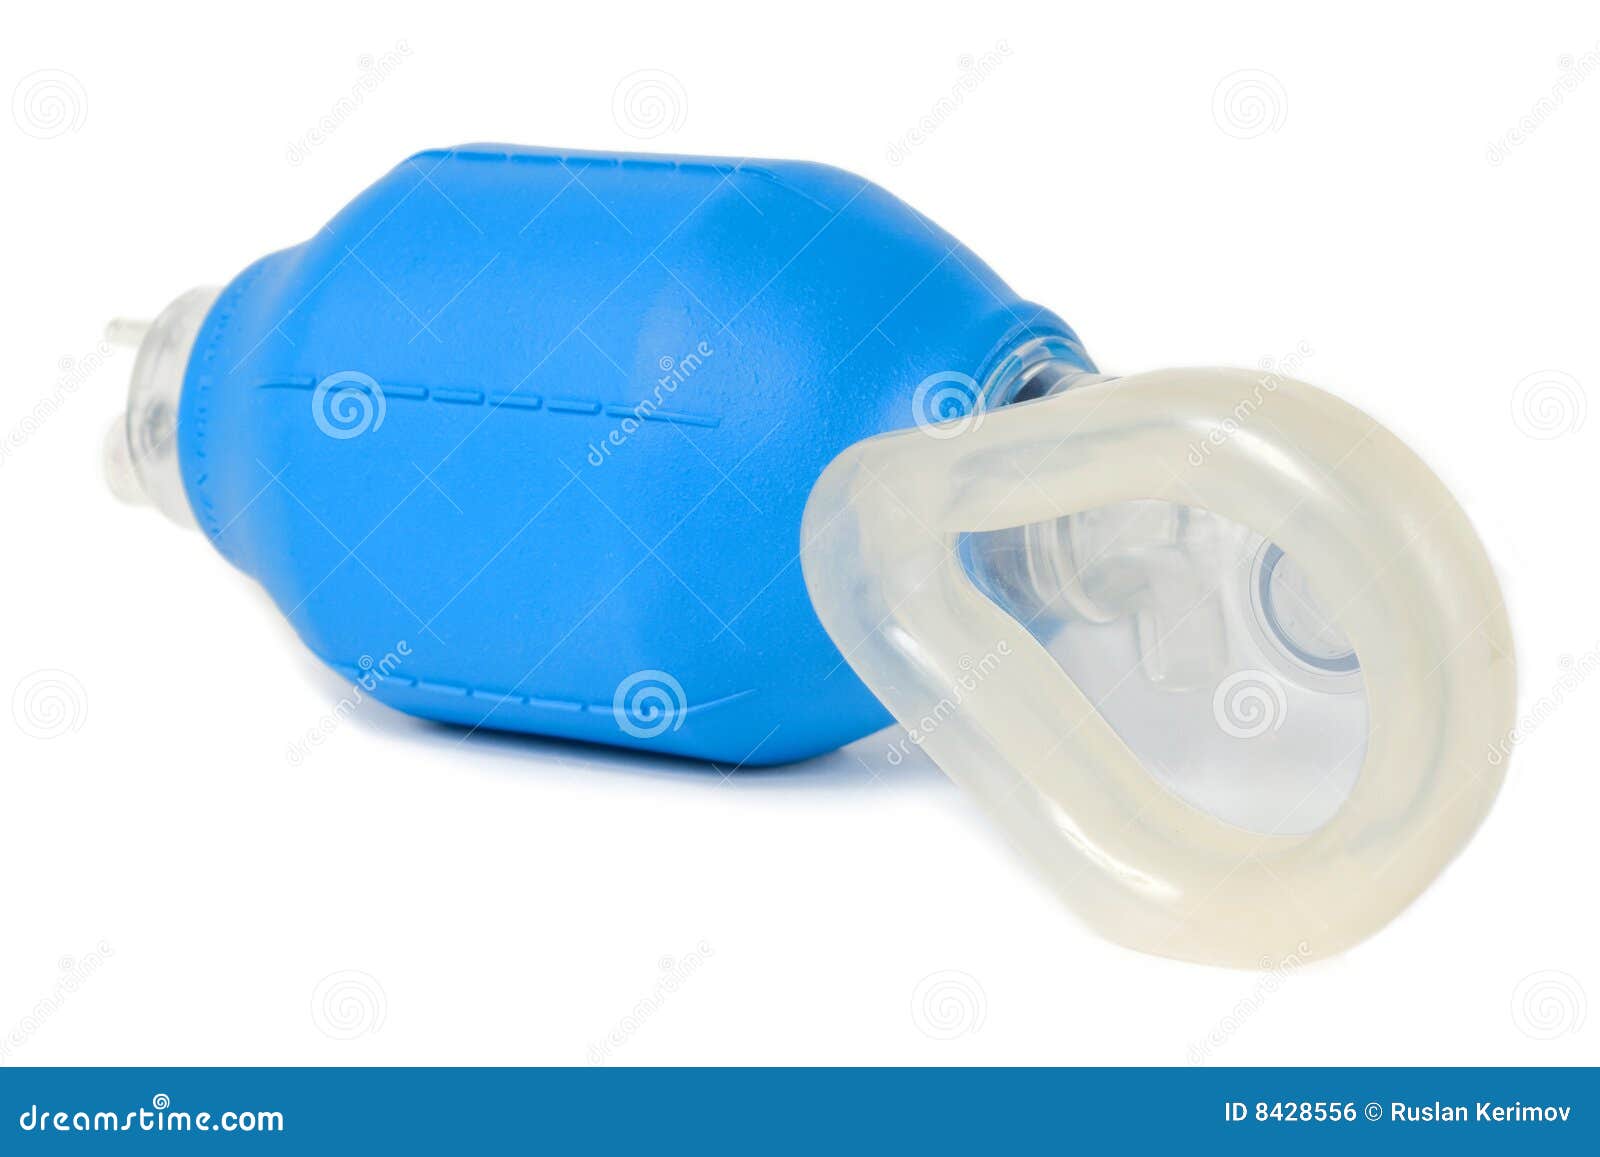 Simple PVC Adult Ambu Water Bag For Manual Resuscitation And Breathing  Assistance From Seepuelectronic, $447.24 | DHgate.Com